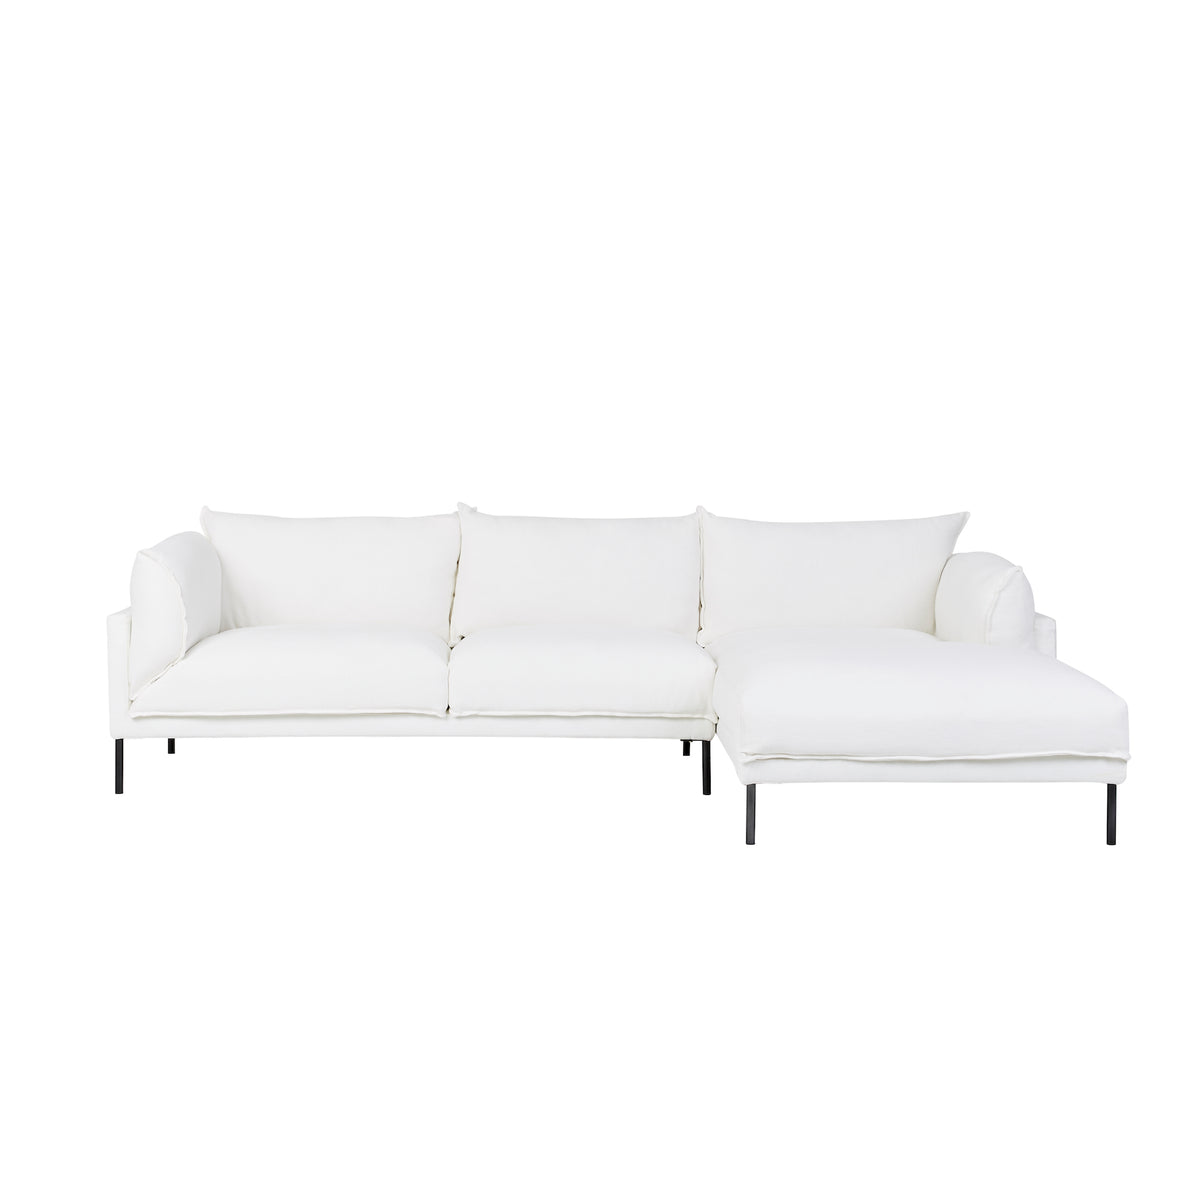 Cove Sleek 3 Seater Right Chaise Set